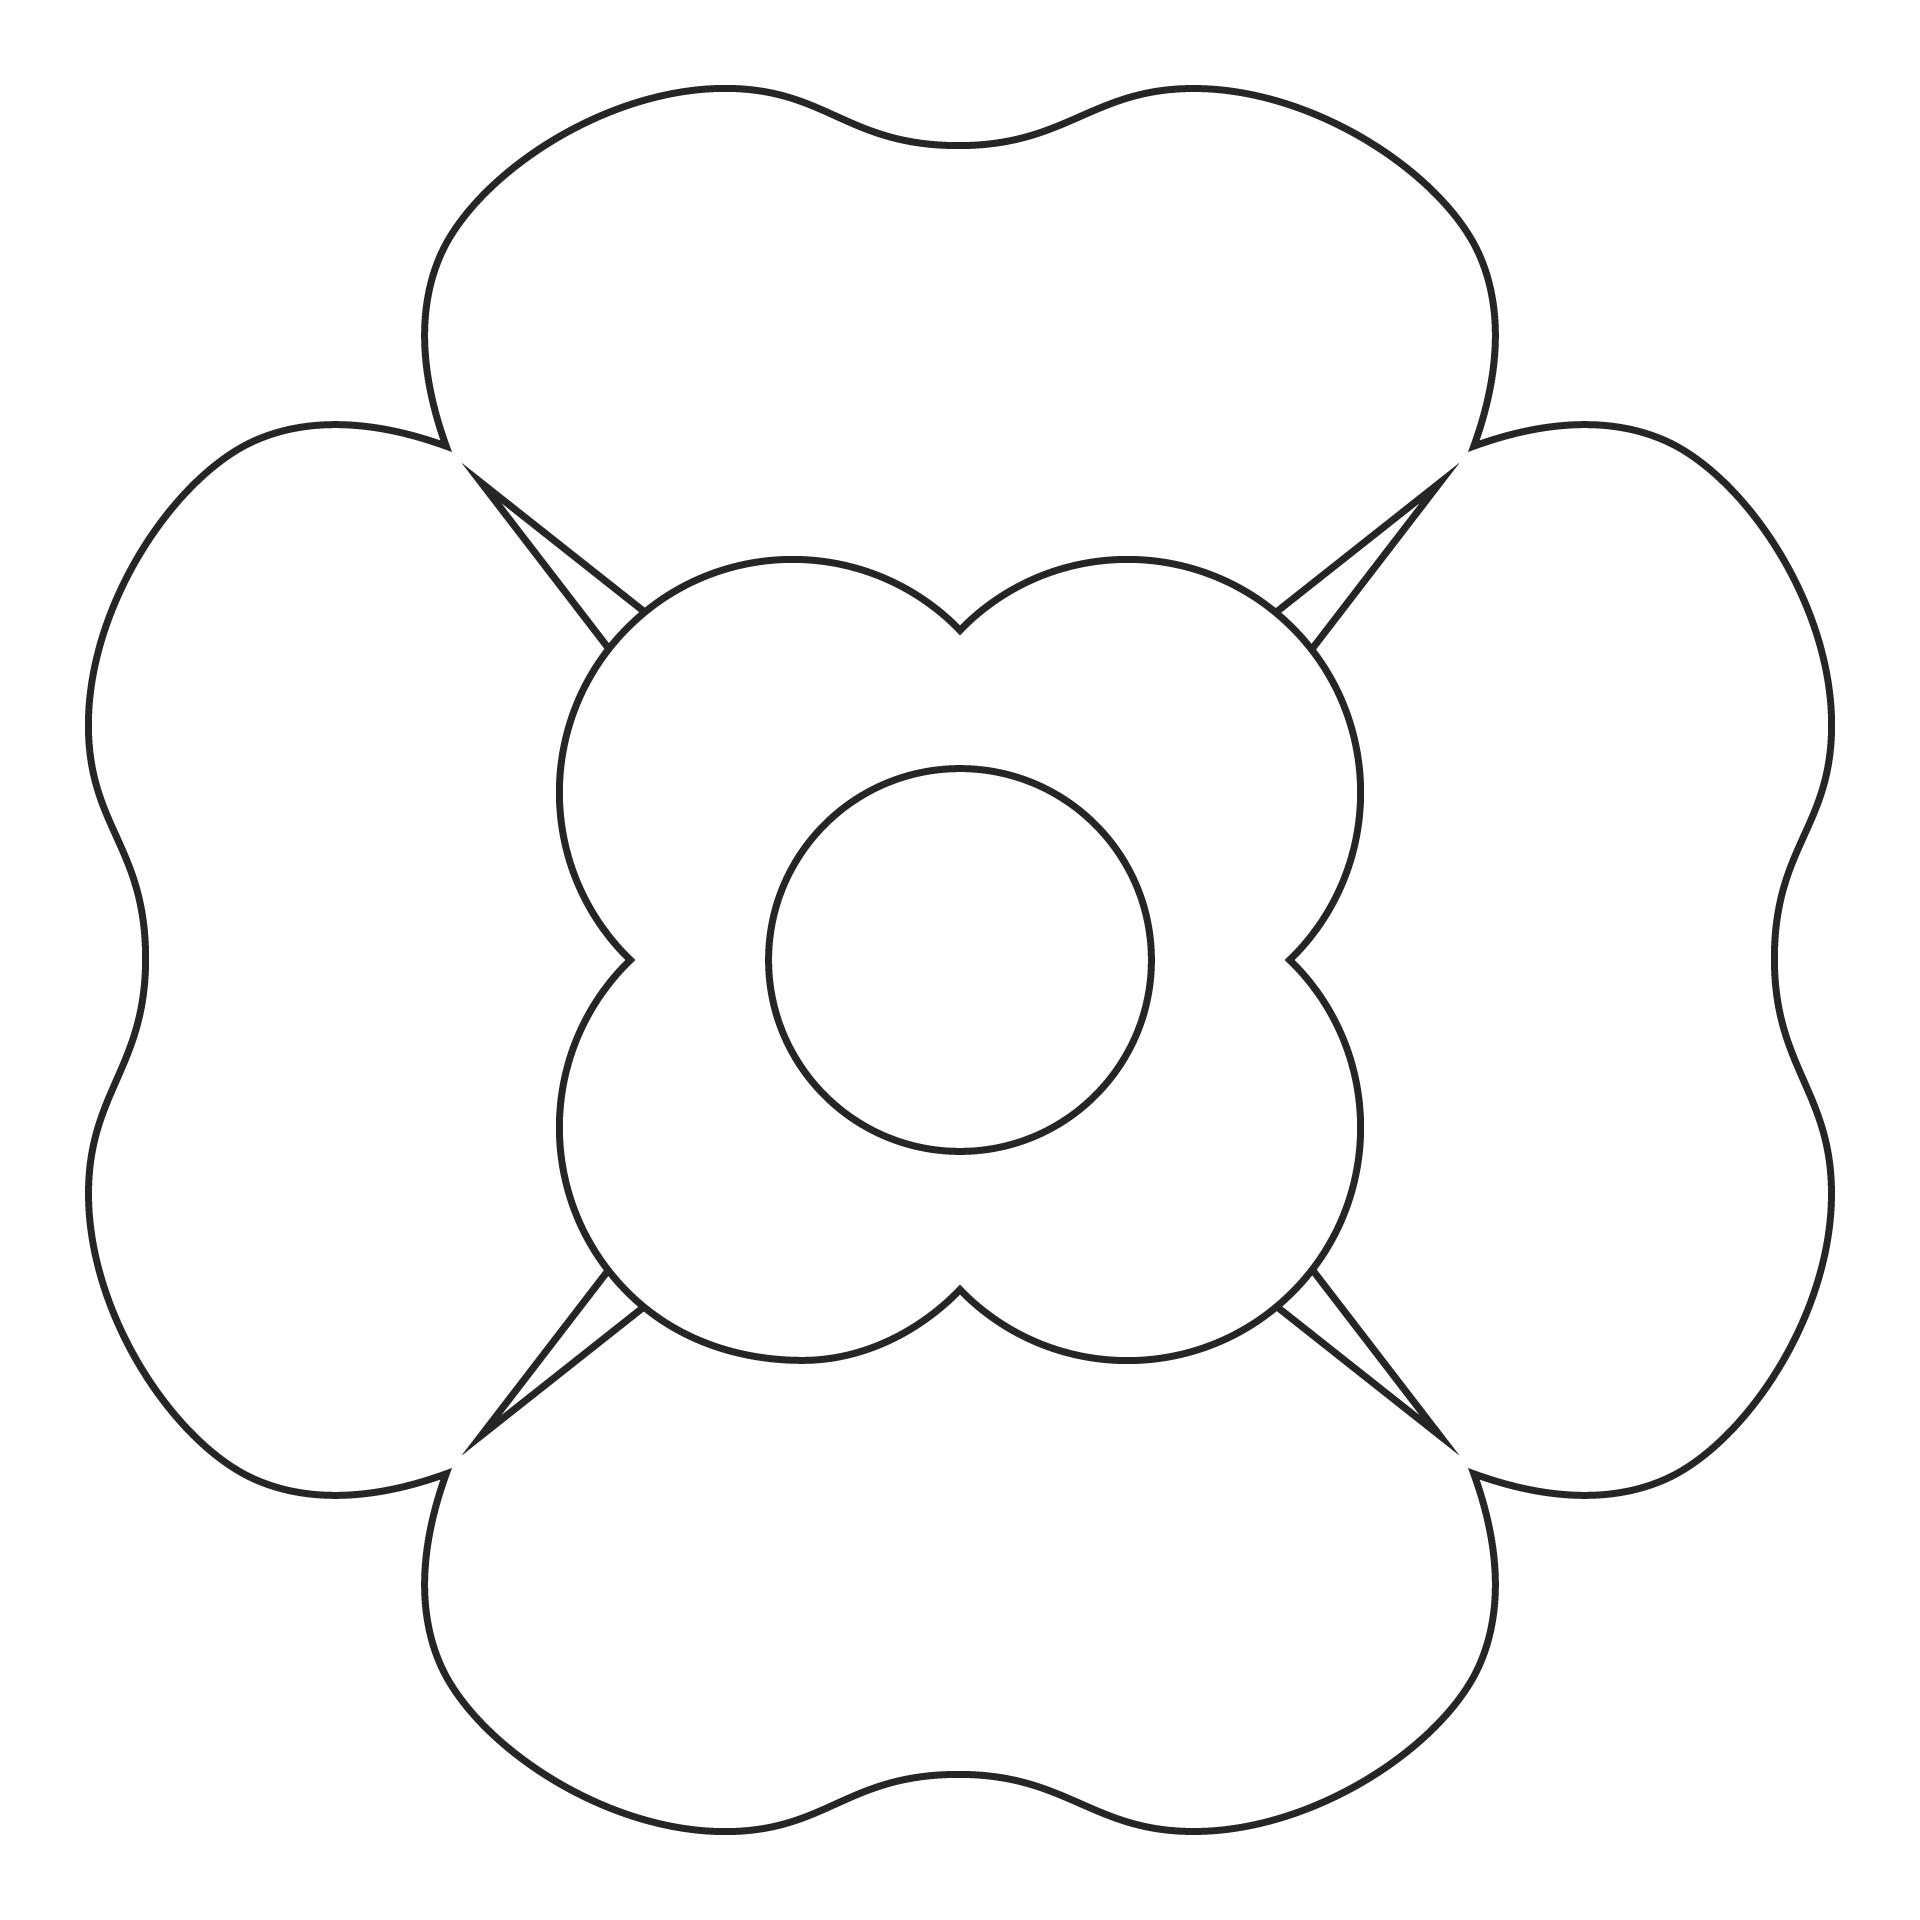 Remembrance Day Poppy Template Printable